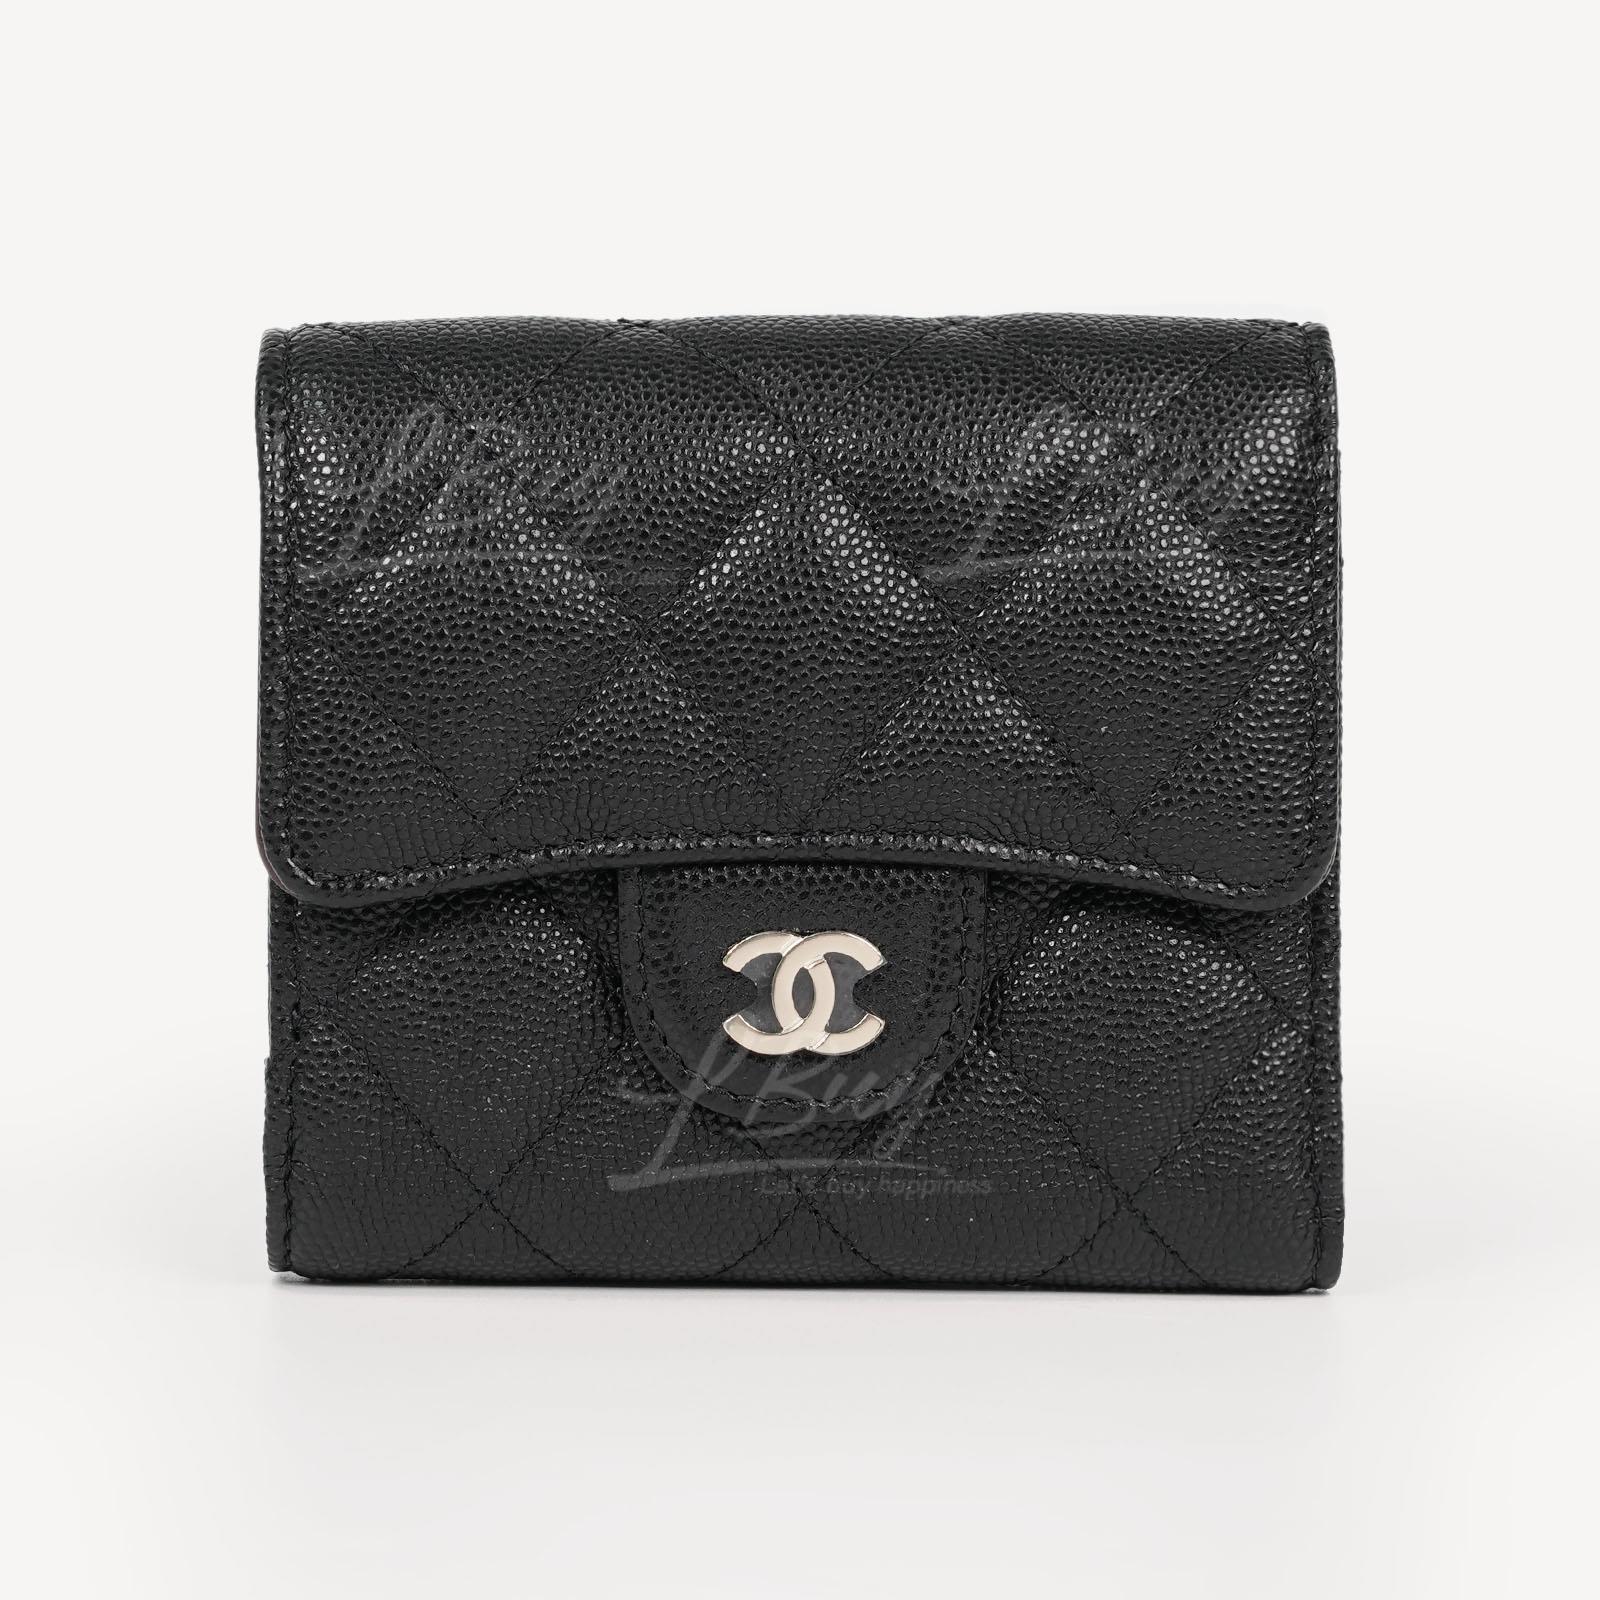 Chanel Classic Small Flap Wallet Black with Gold Tone Metal AP0712